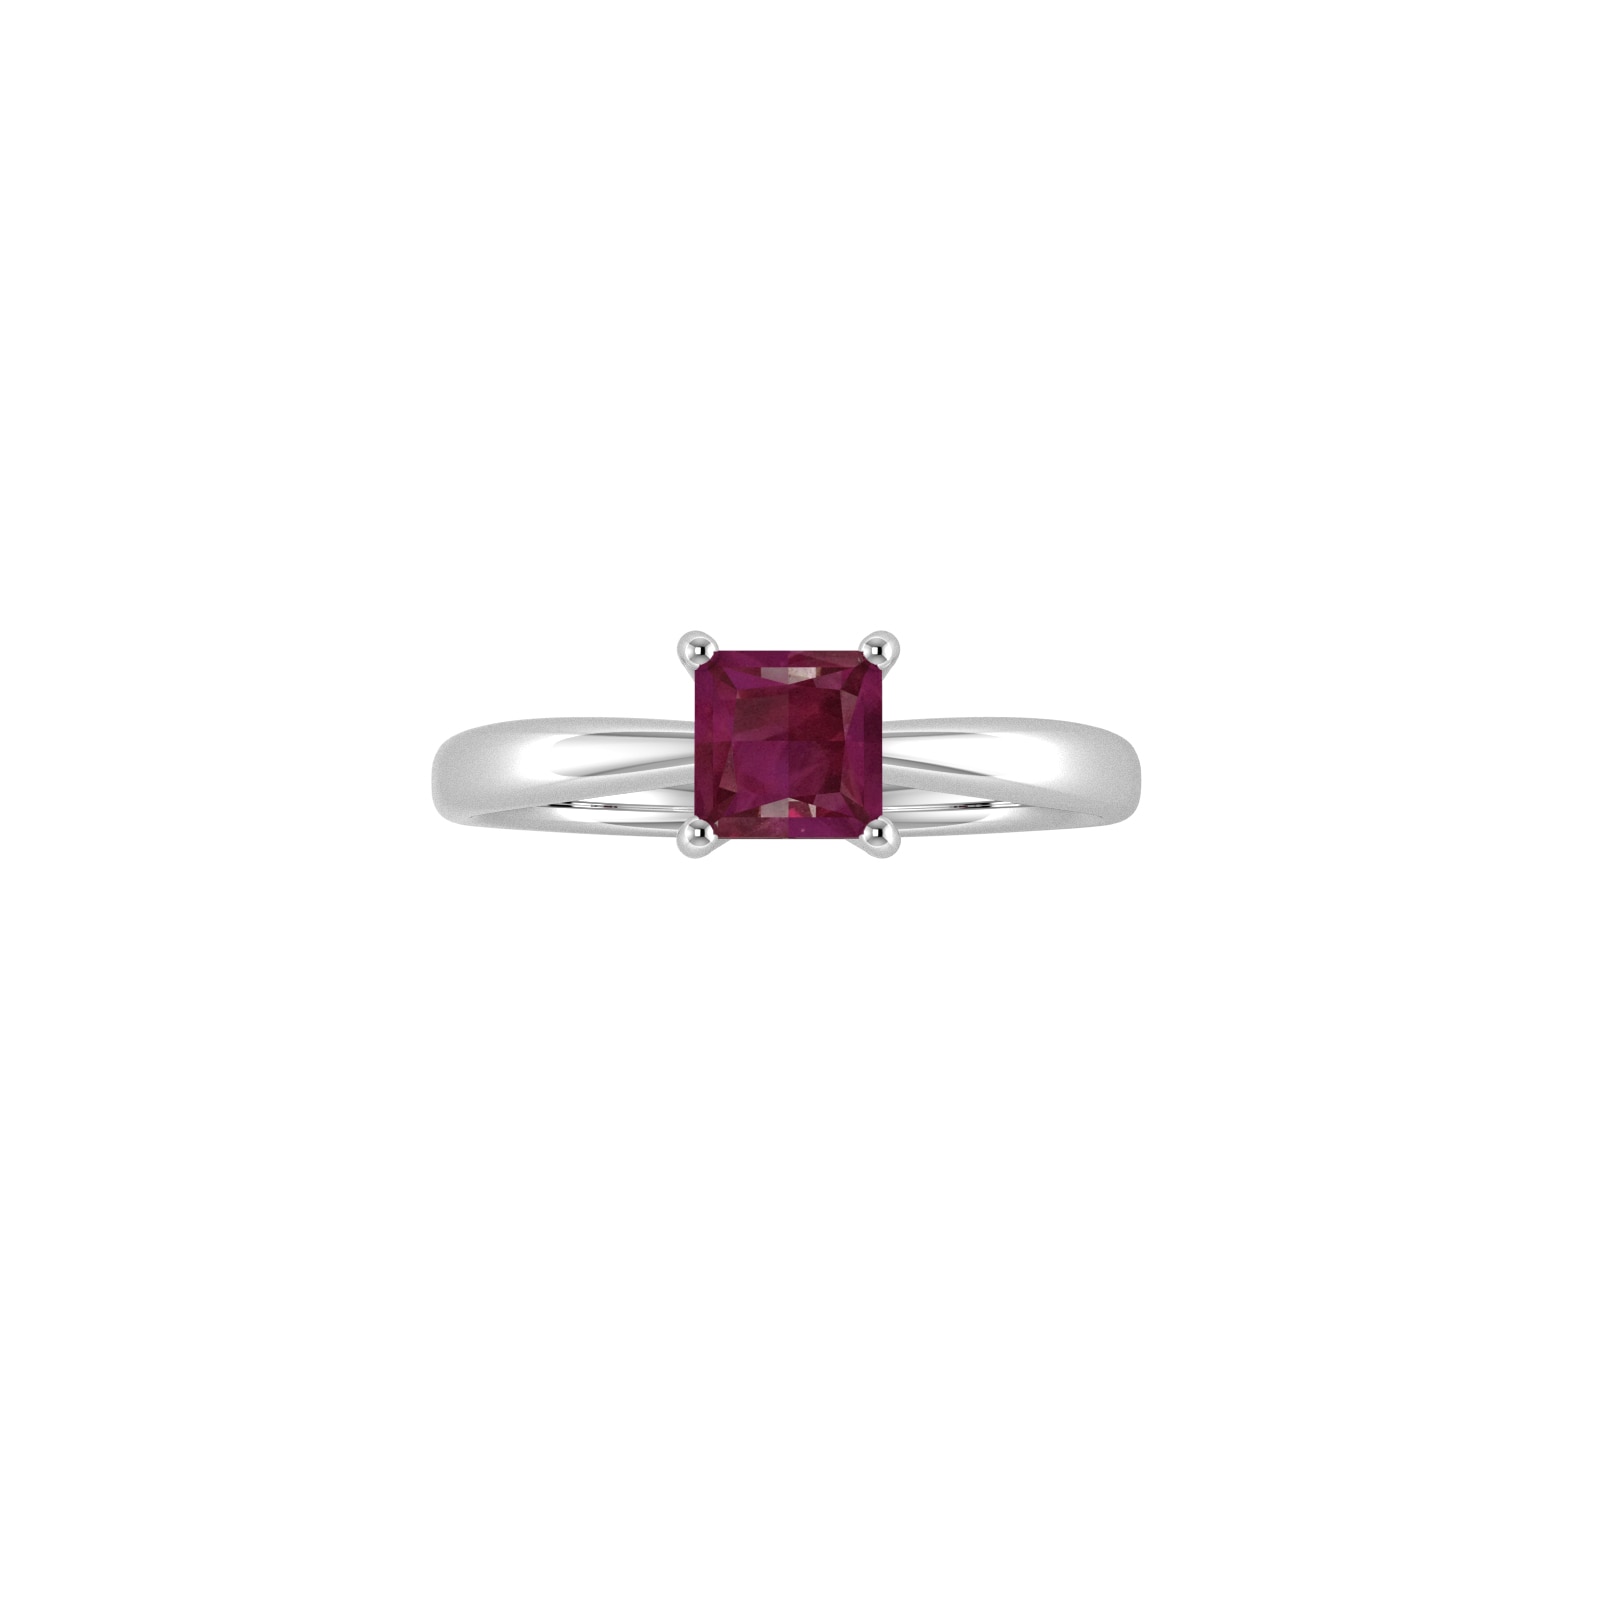 9ct White Gold 4 Claw Square Ruby 5mm x 5mm Ring- Ring Size U